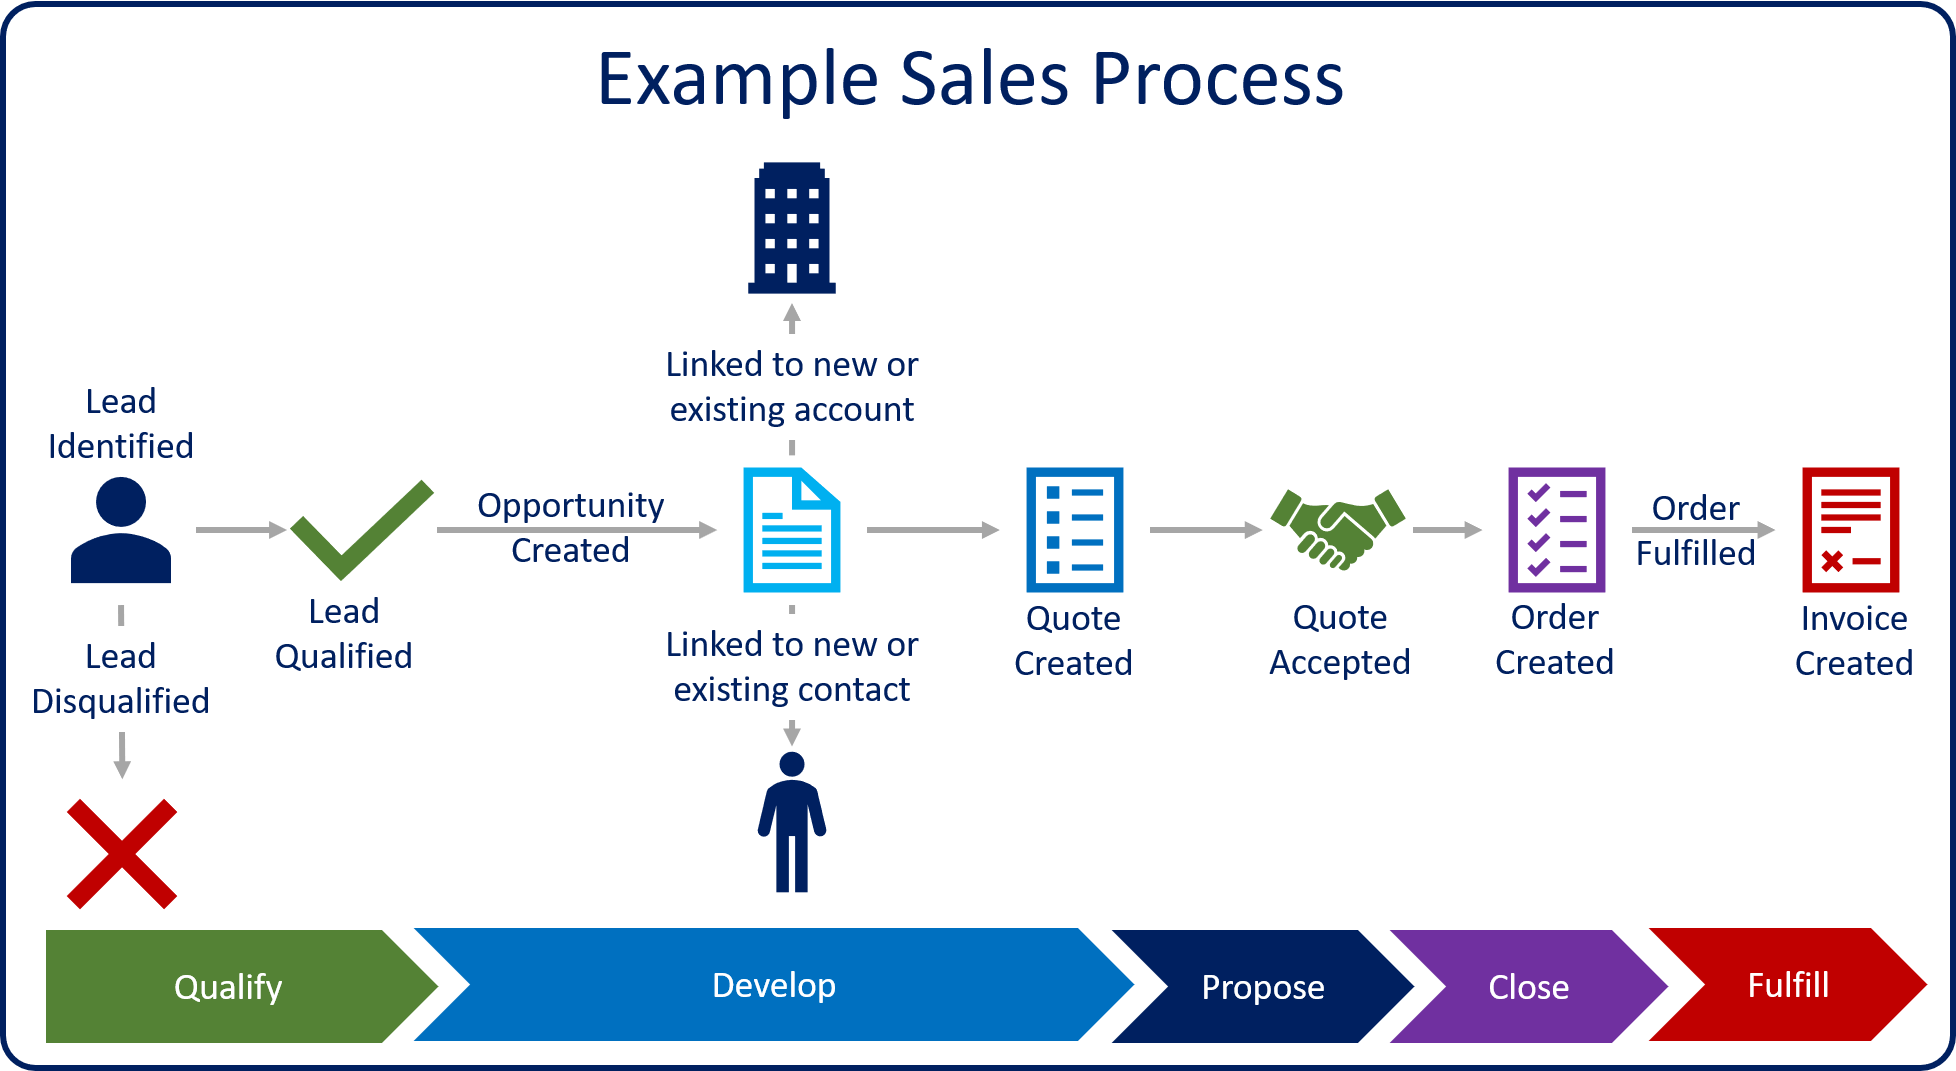 Example sales process (Qualify > Develop > Propose > Close > Fulfill).